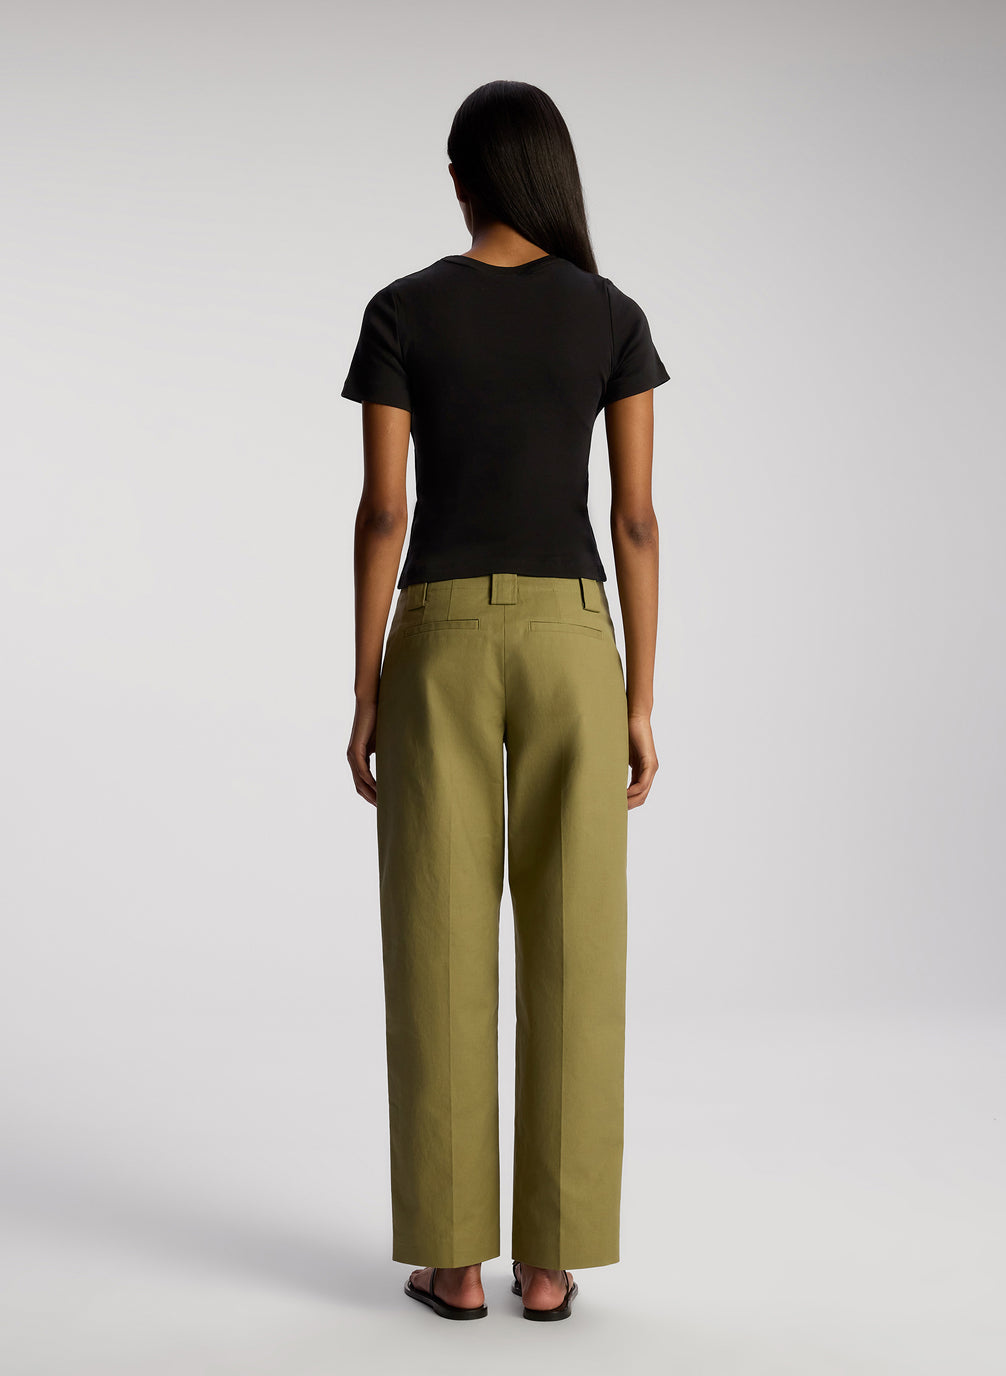 back view of woman wearing black tshirt and olive green pants